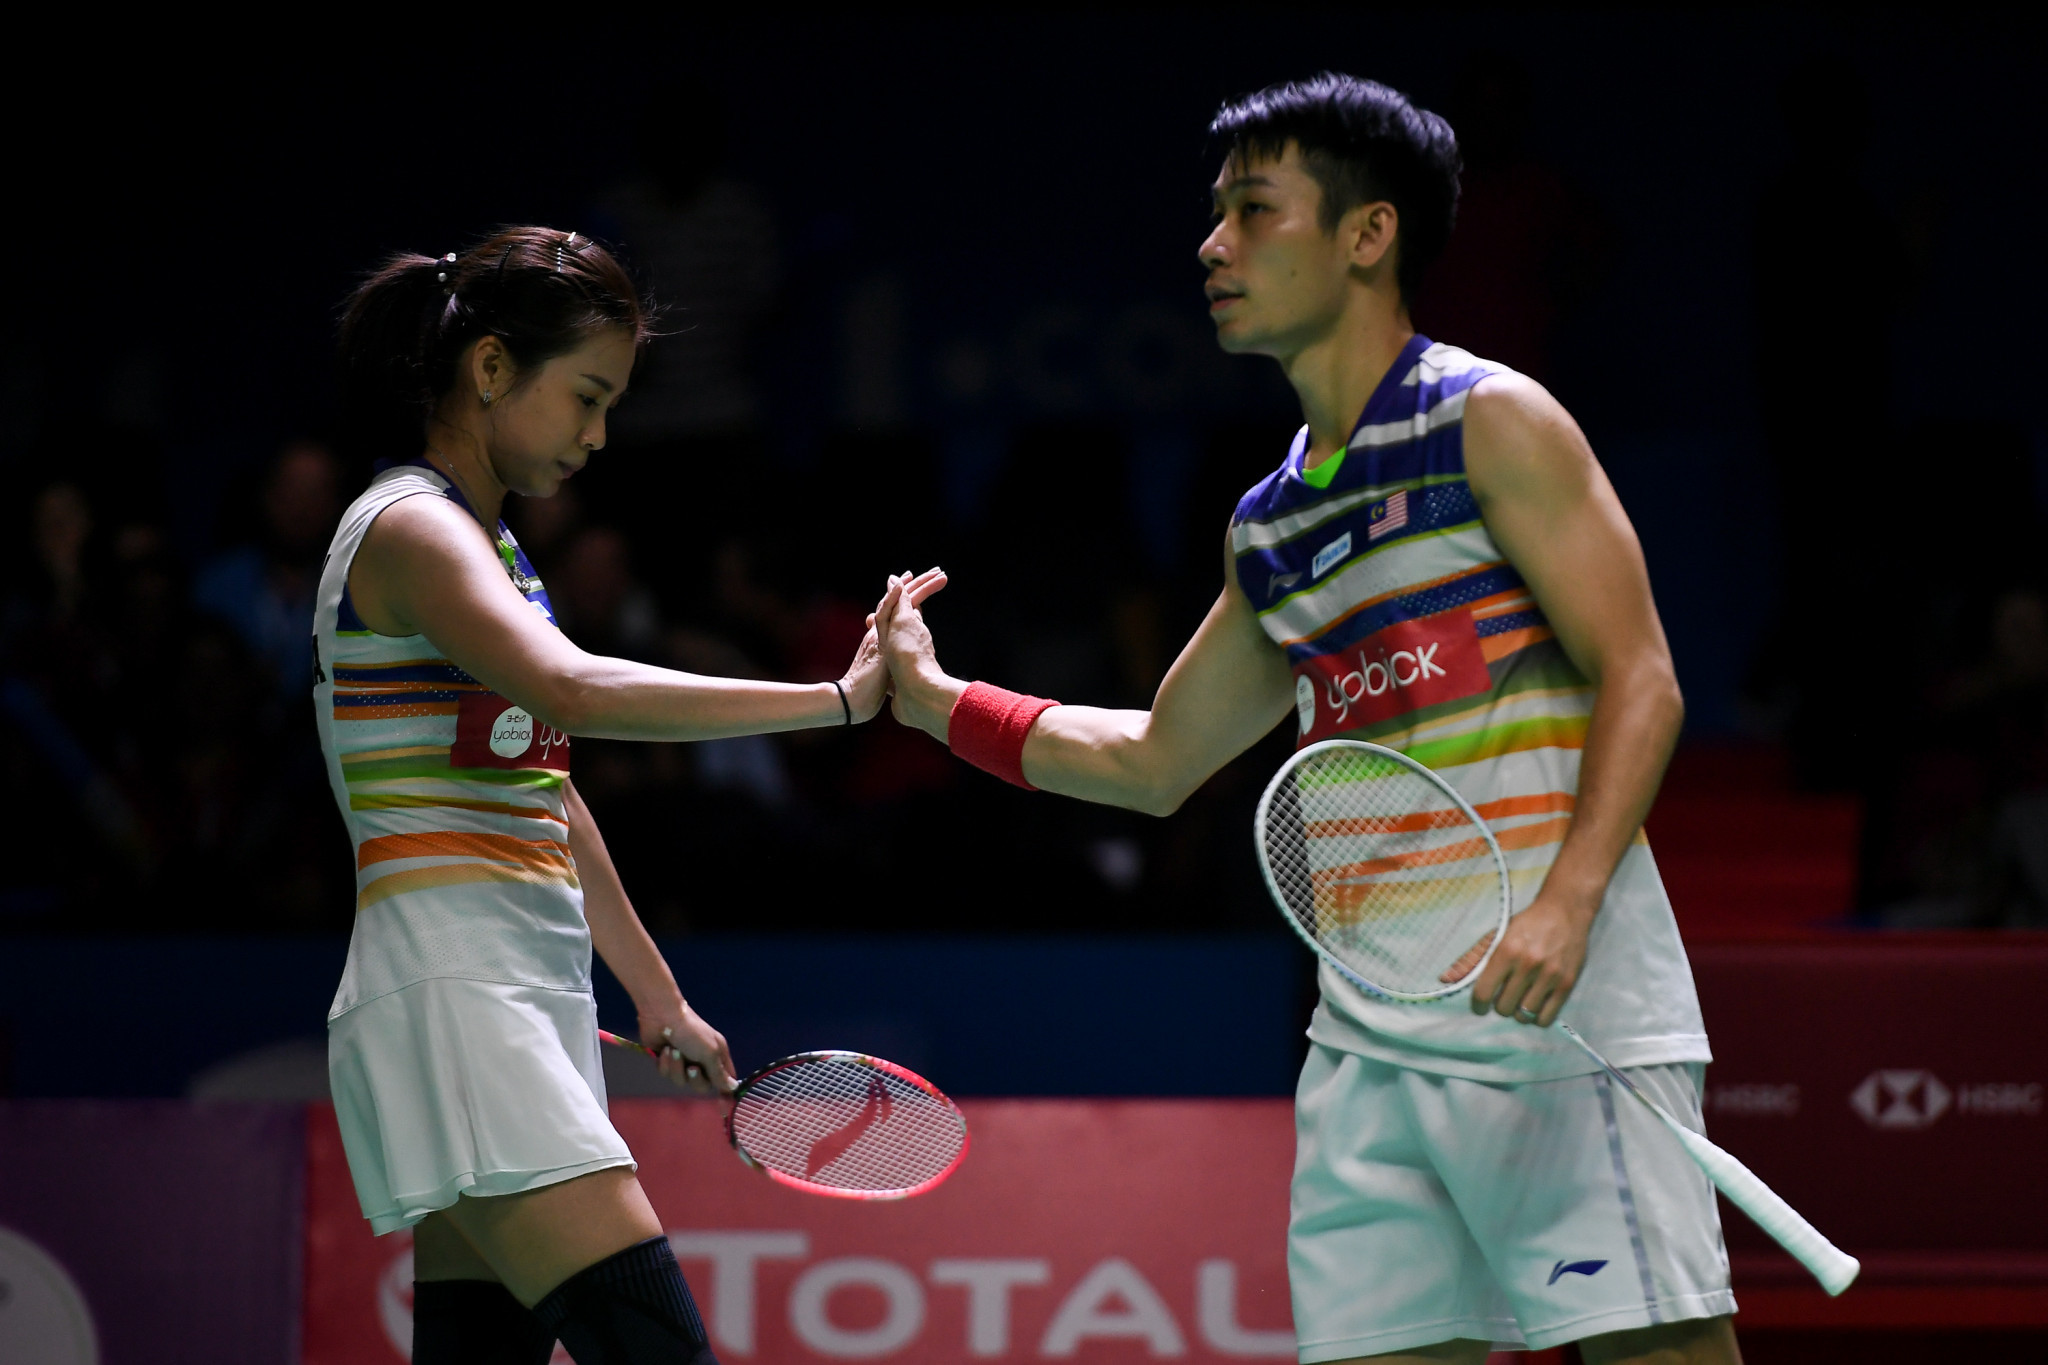 The mixed doubles first round is scheduled to take place tomorrow at the BWF Yonex Swiss Open, with Chan Peng Soon and Goh Liu Ying of Malaysia the top seeds ©Getty Images